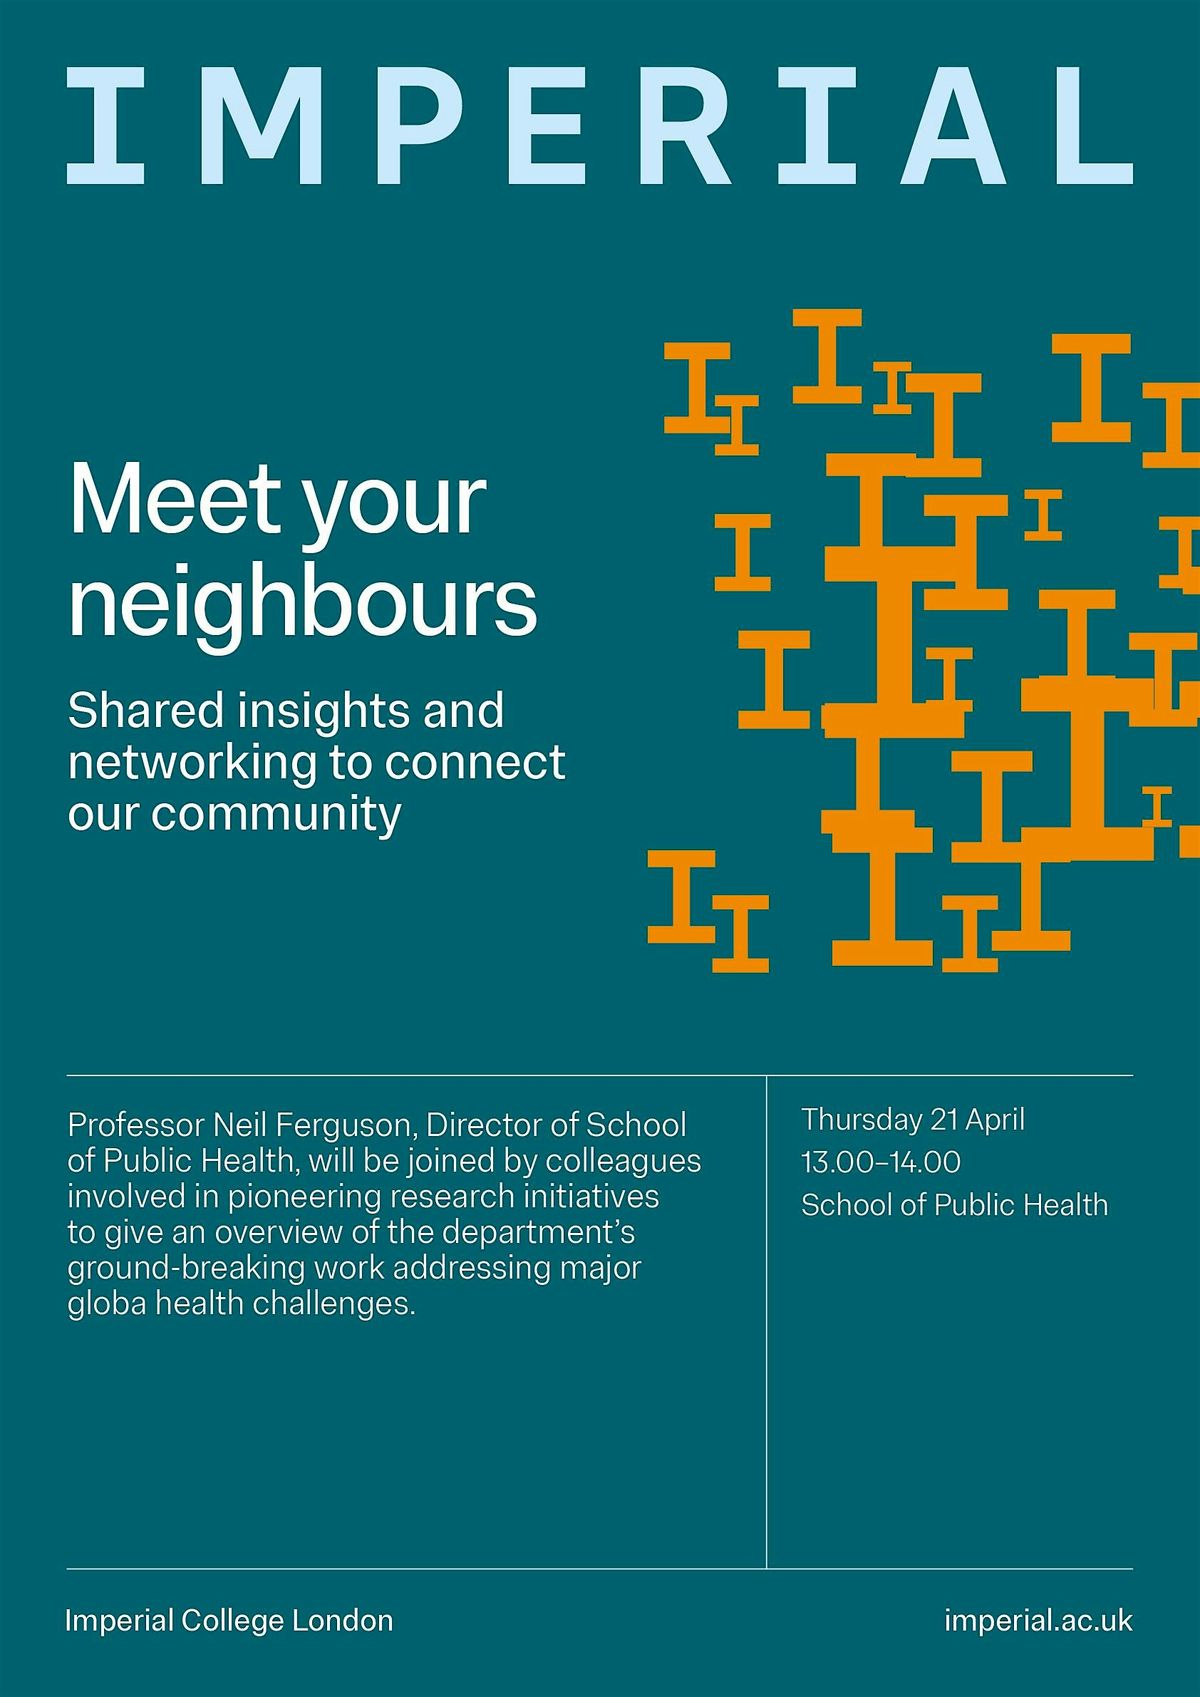 Meet your neighbours - White City and Hammersmith Campus